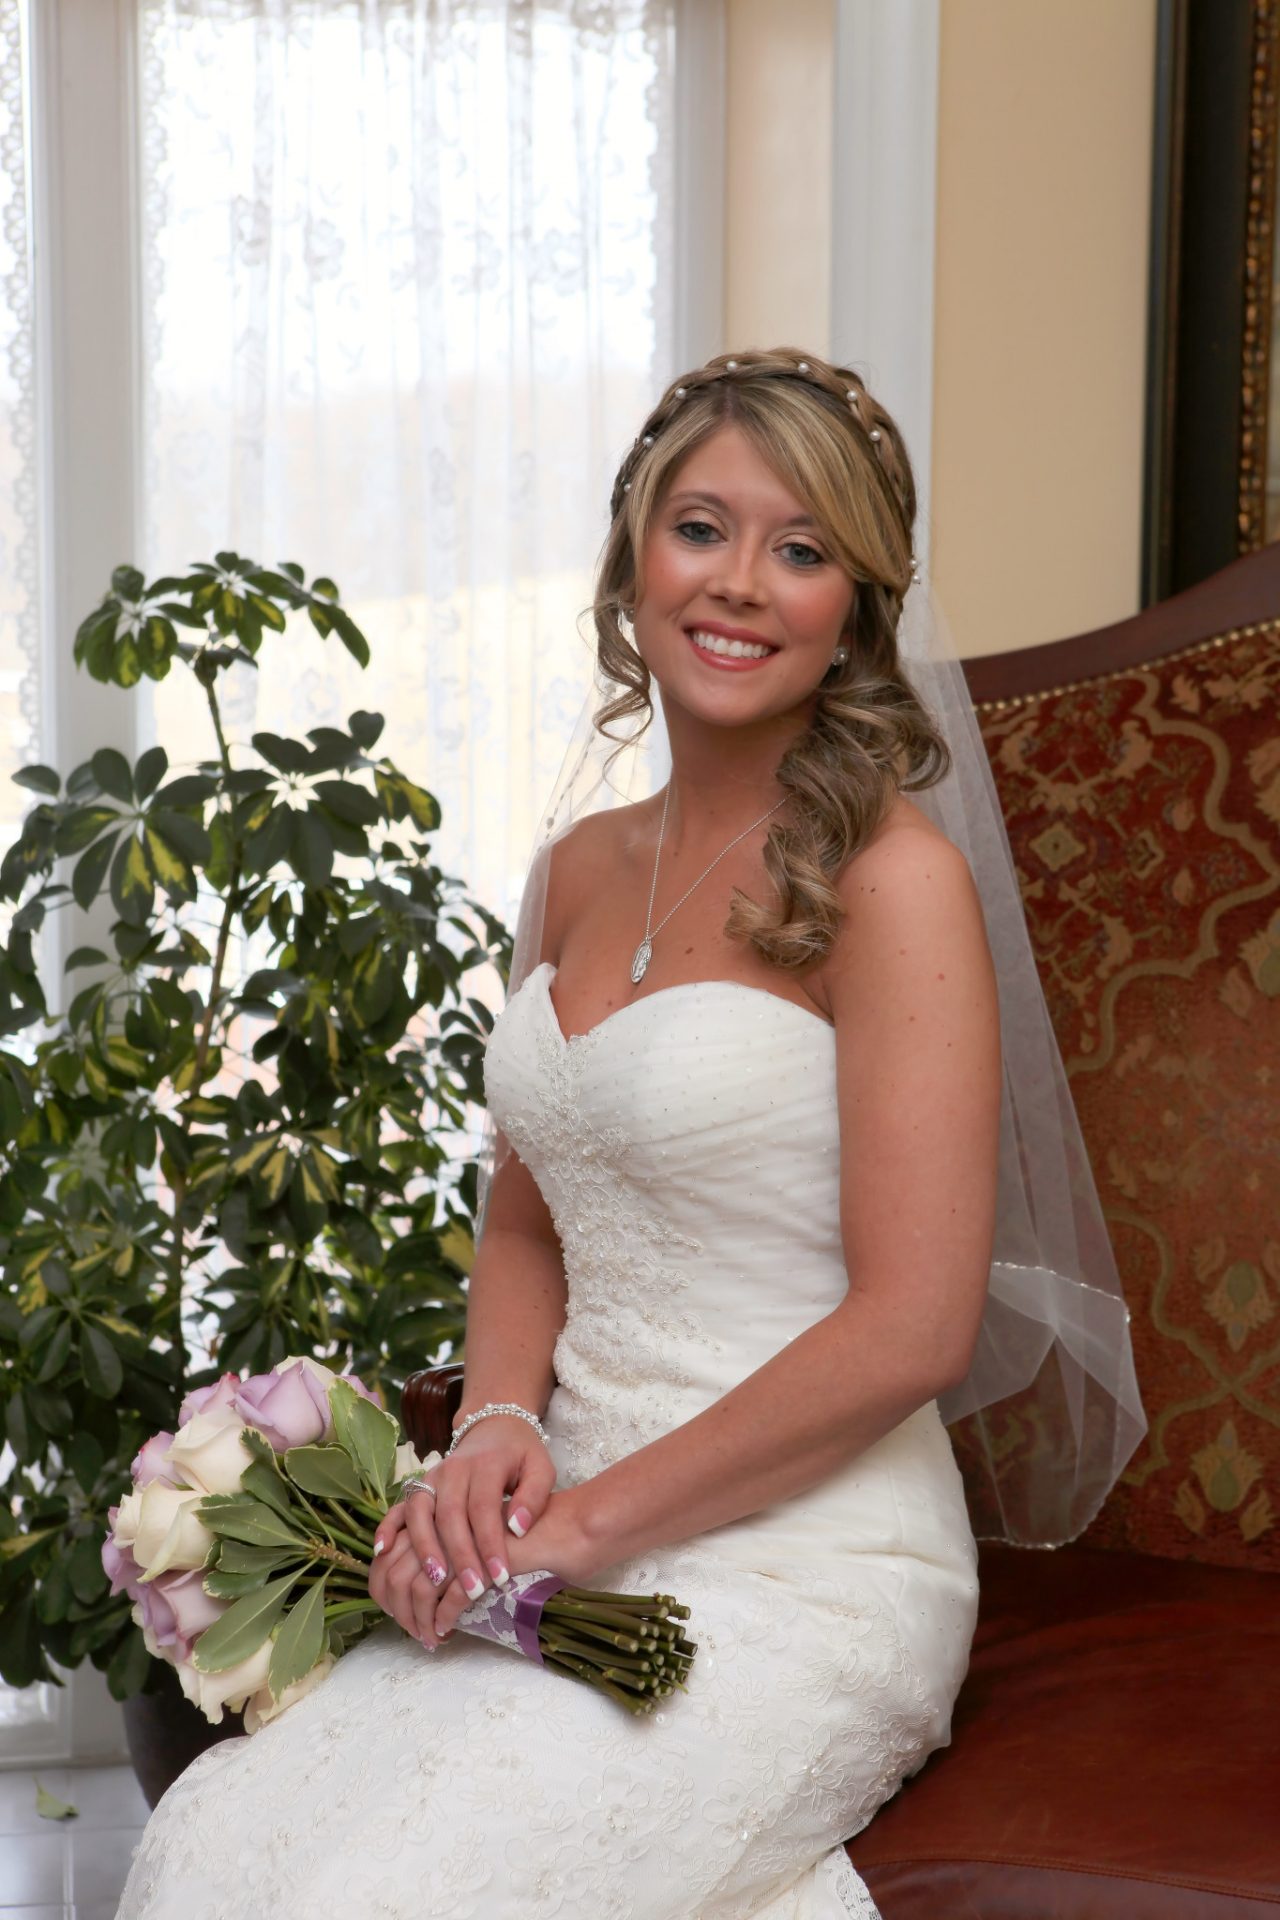 Bride sitting on leather couch by window in bride's room before wedding ceremony